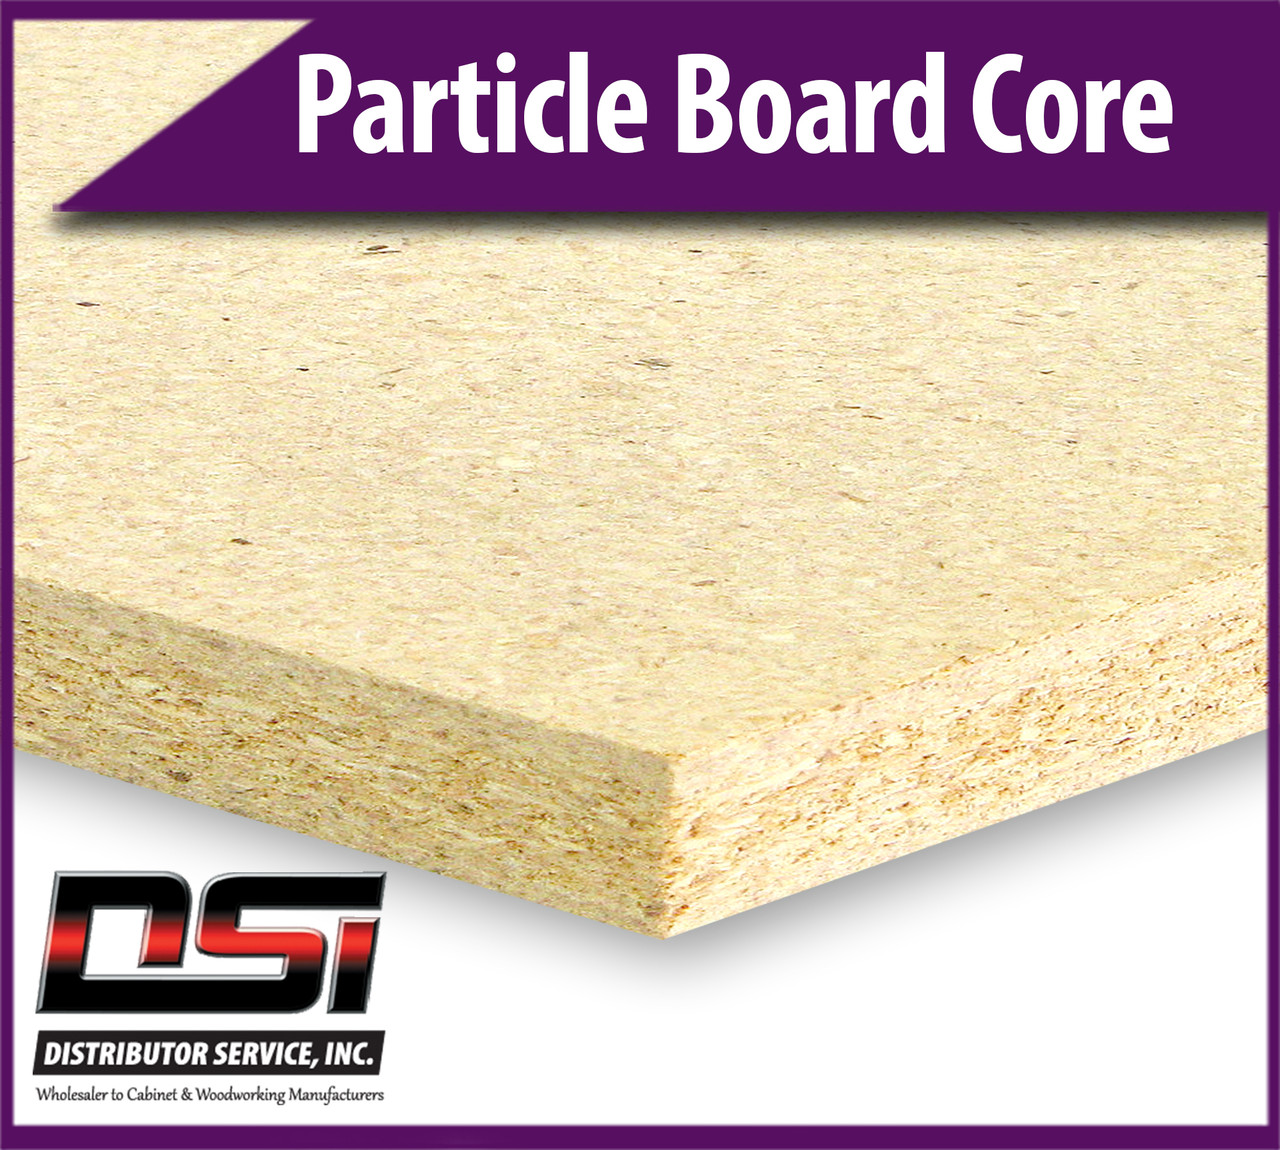 Particle Board Core 1/2" x 61" x 145" Industrial Particleboard Panels